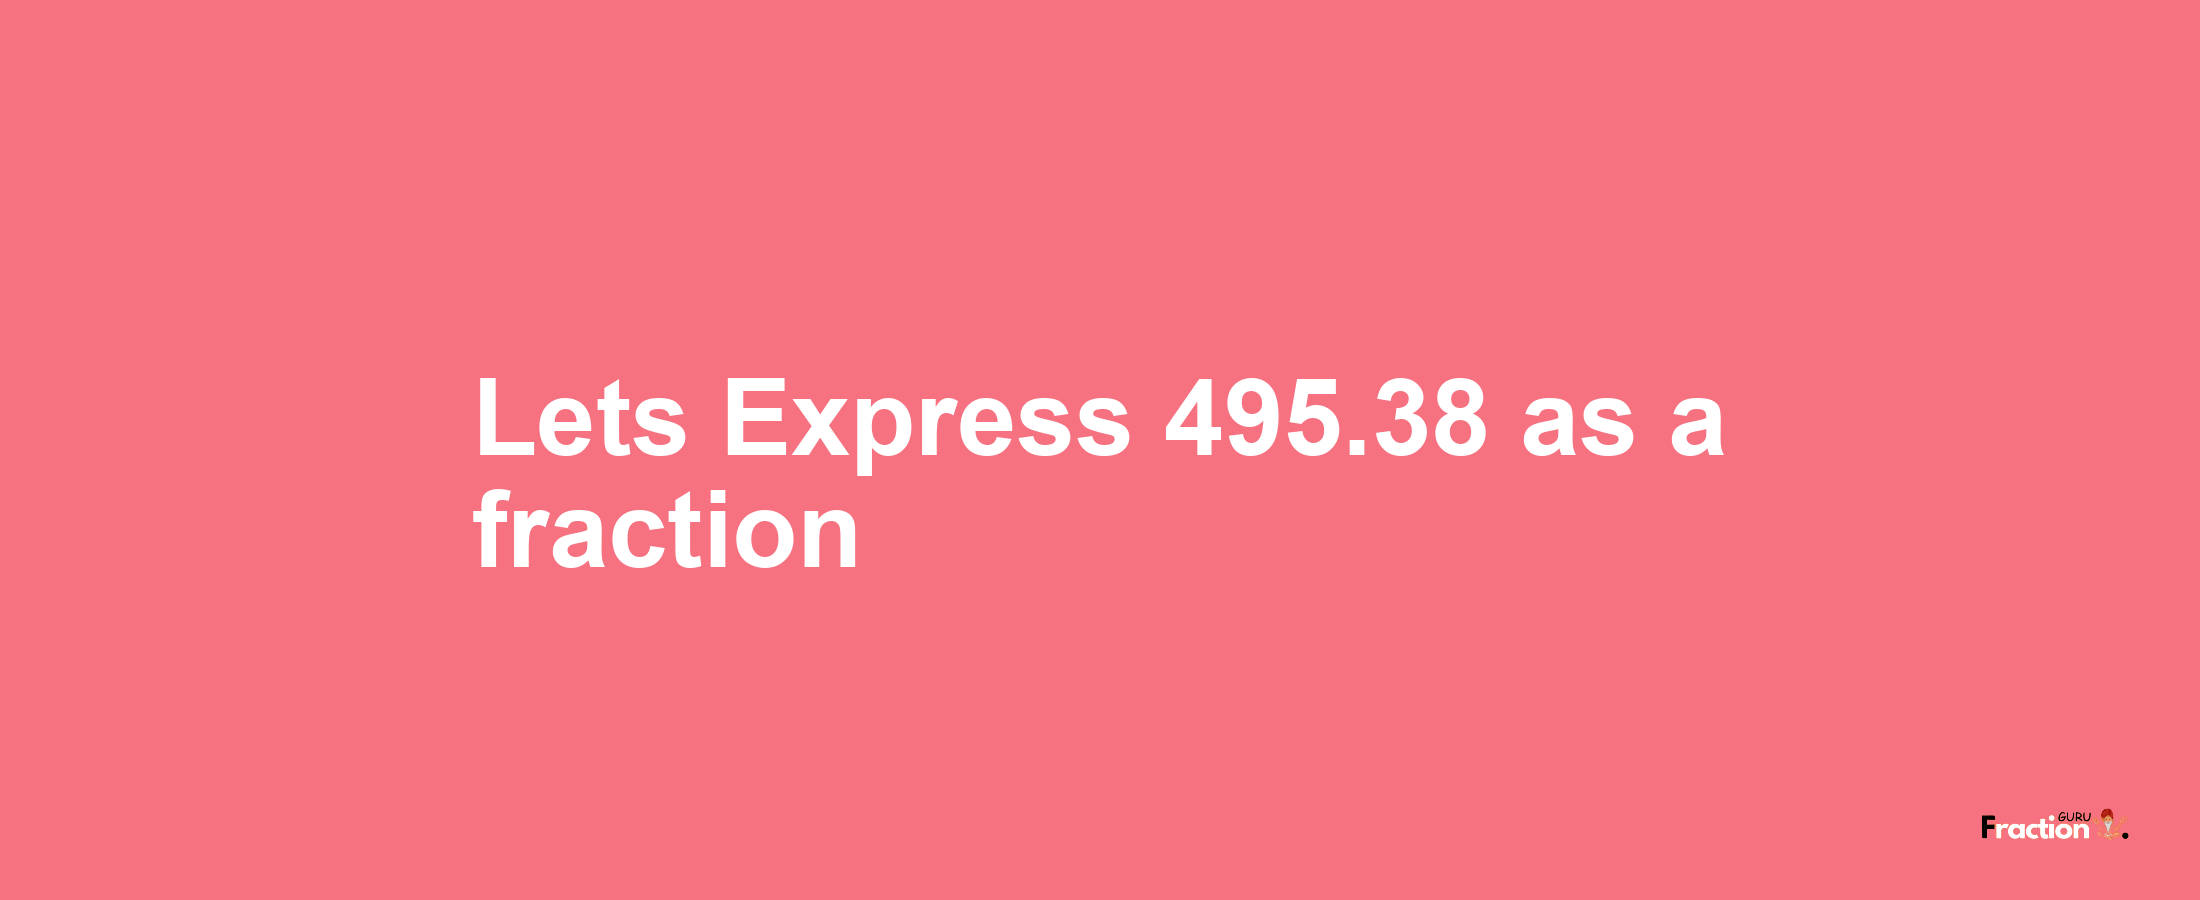 Lets Express 495.38 as afraction